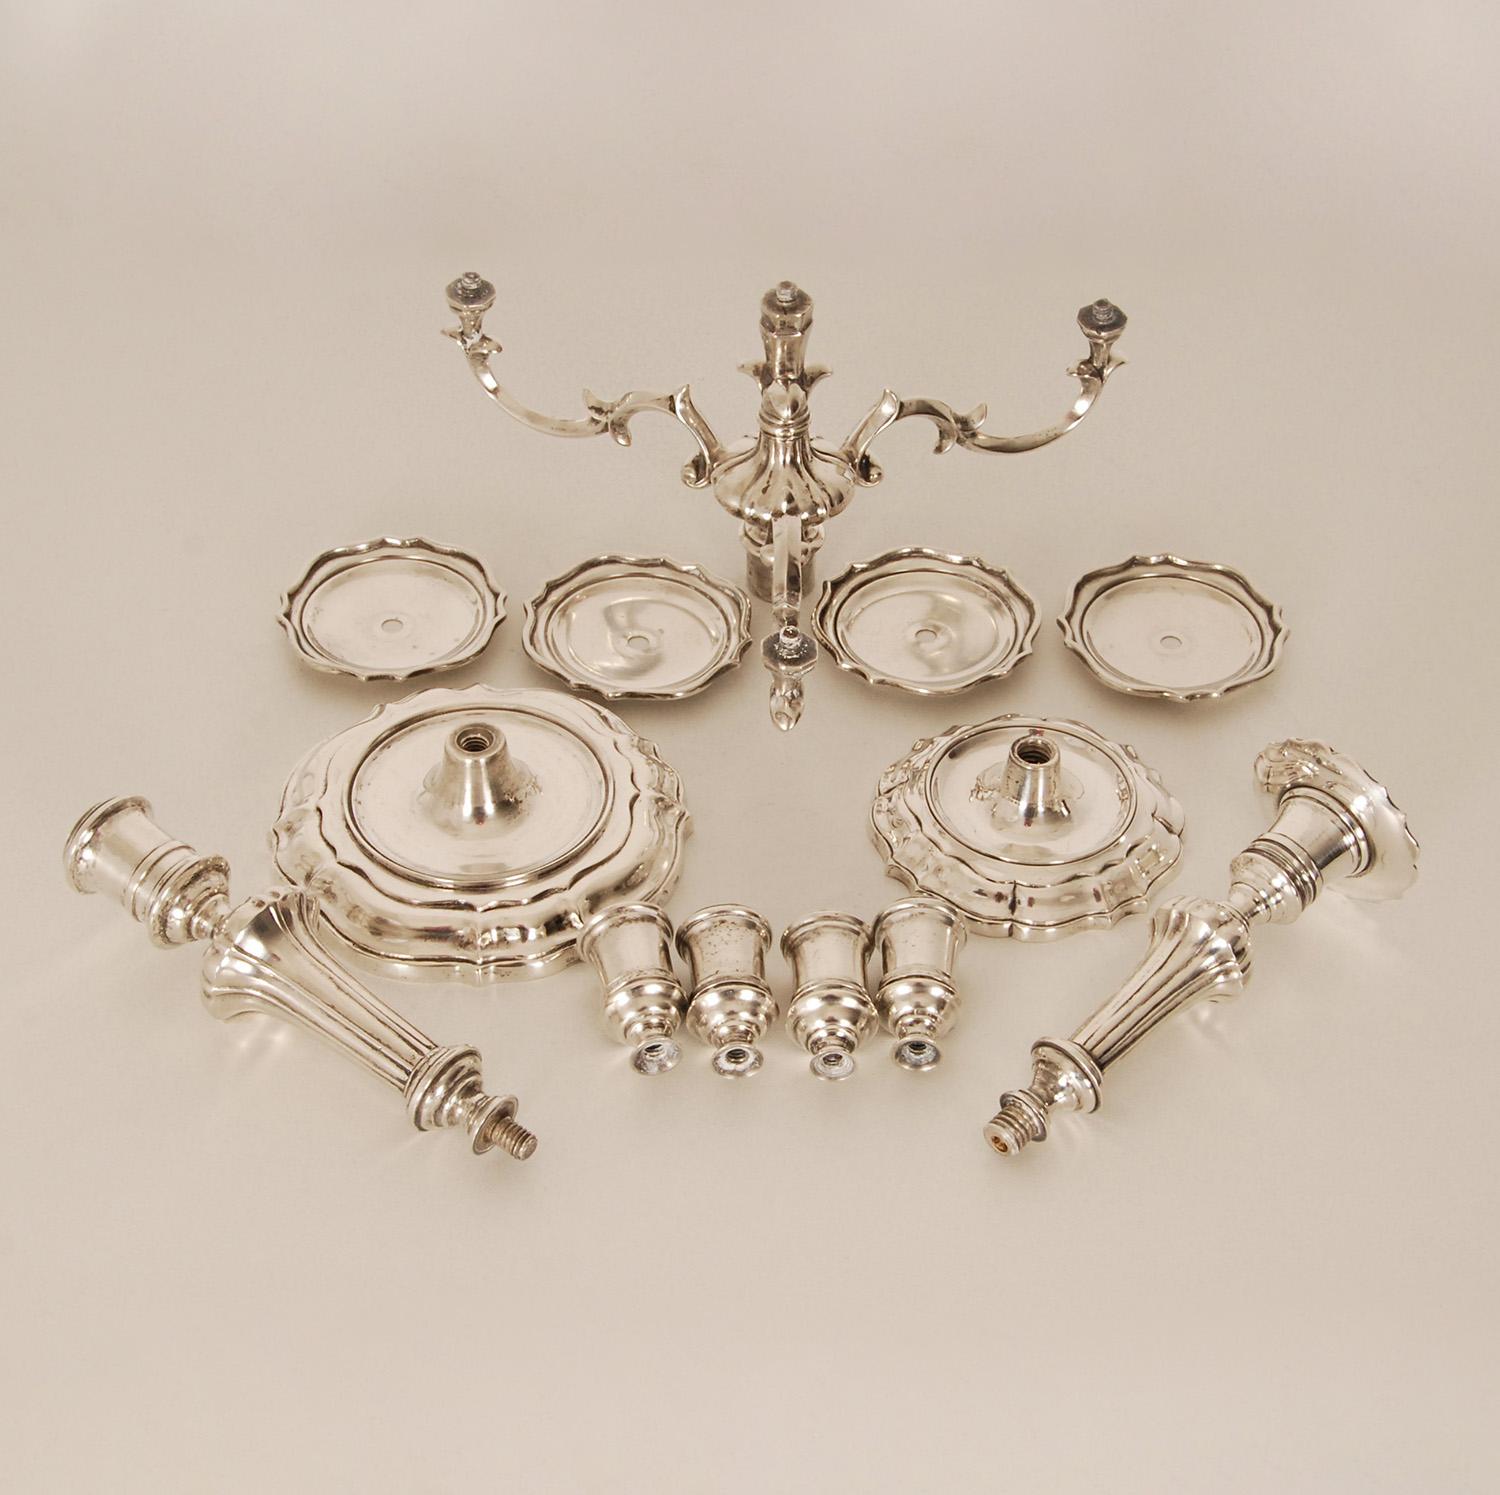 18th Century Italian Candelabra Rococo Sterling Silver Candlesticks Venice pair For Sale 10